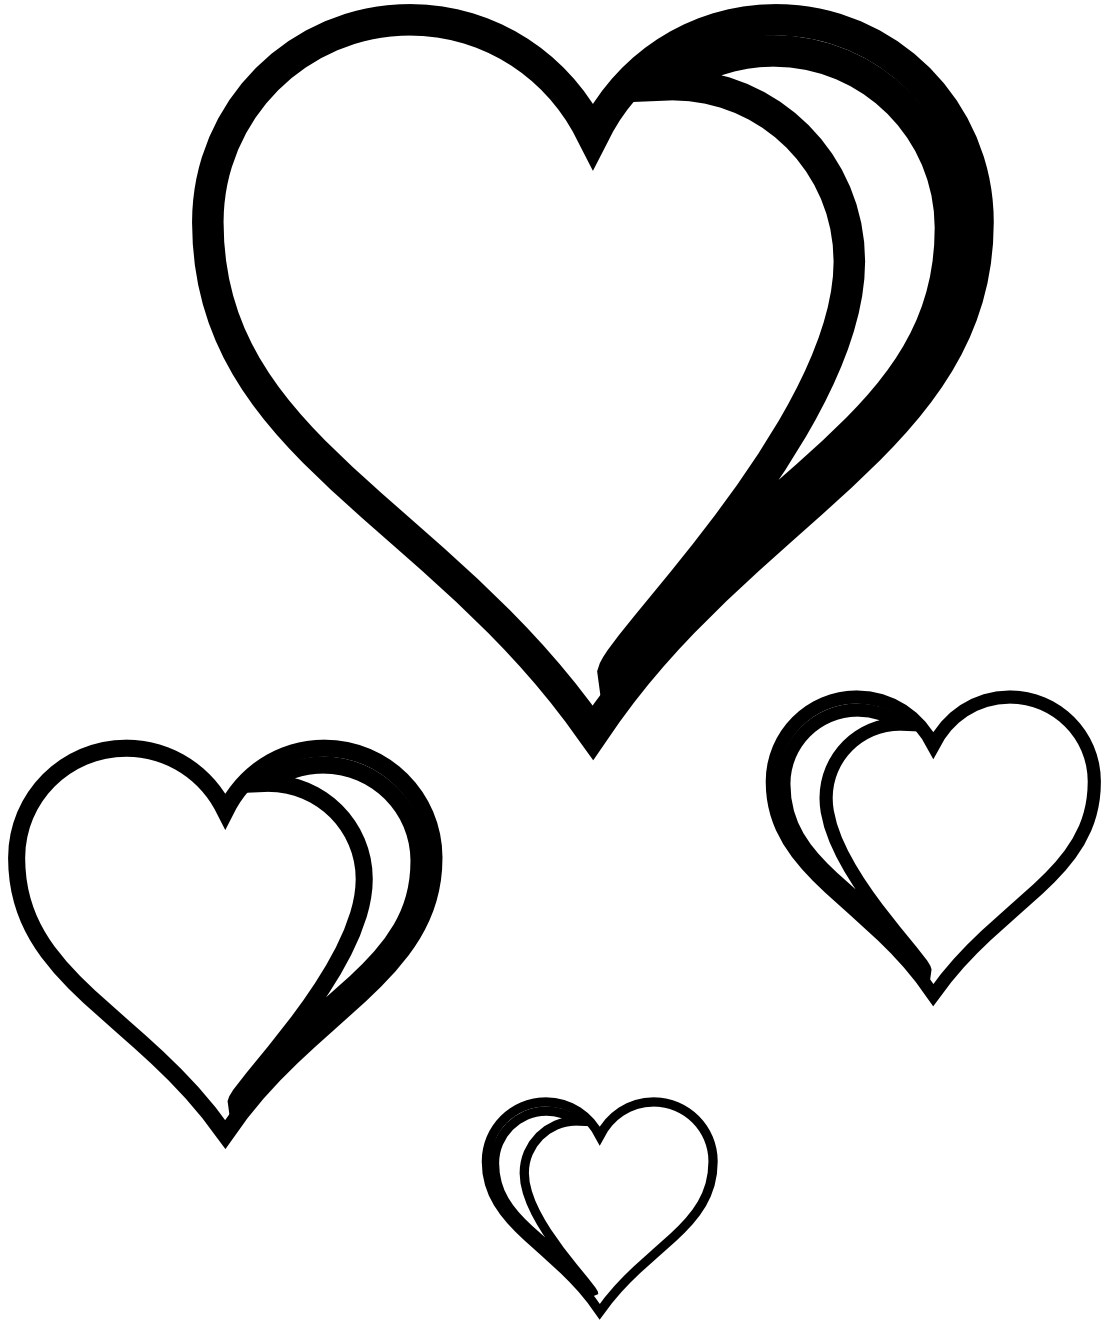 Valentines For > Broken Heart Clipart Black And White